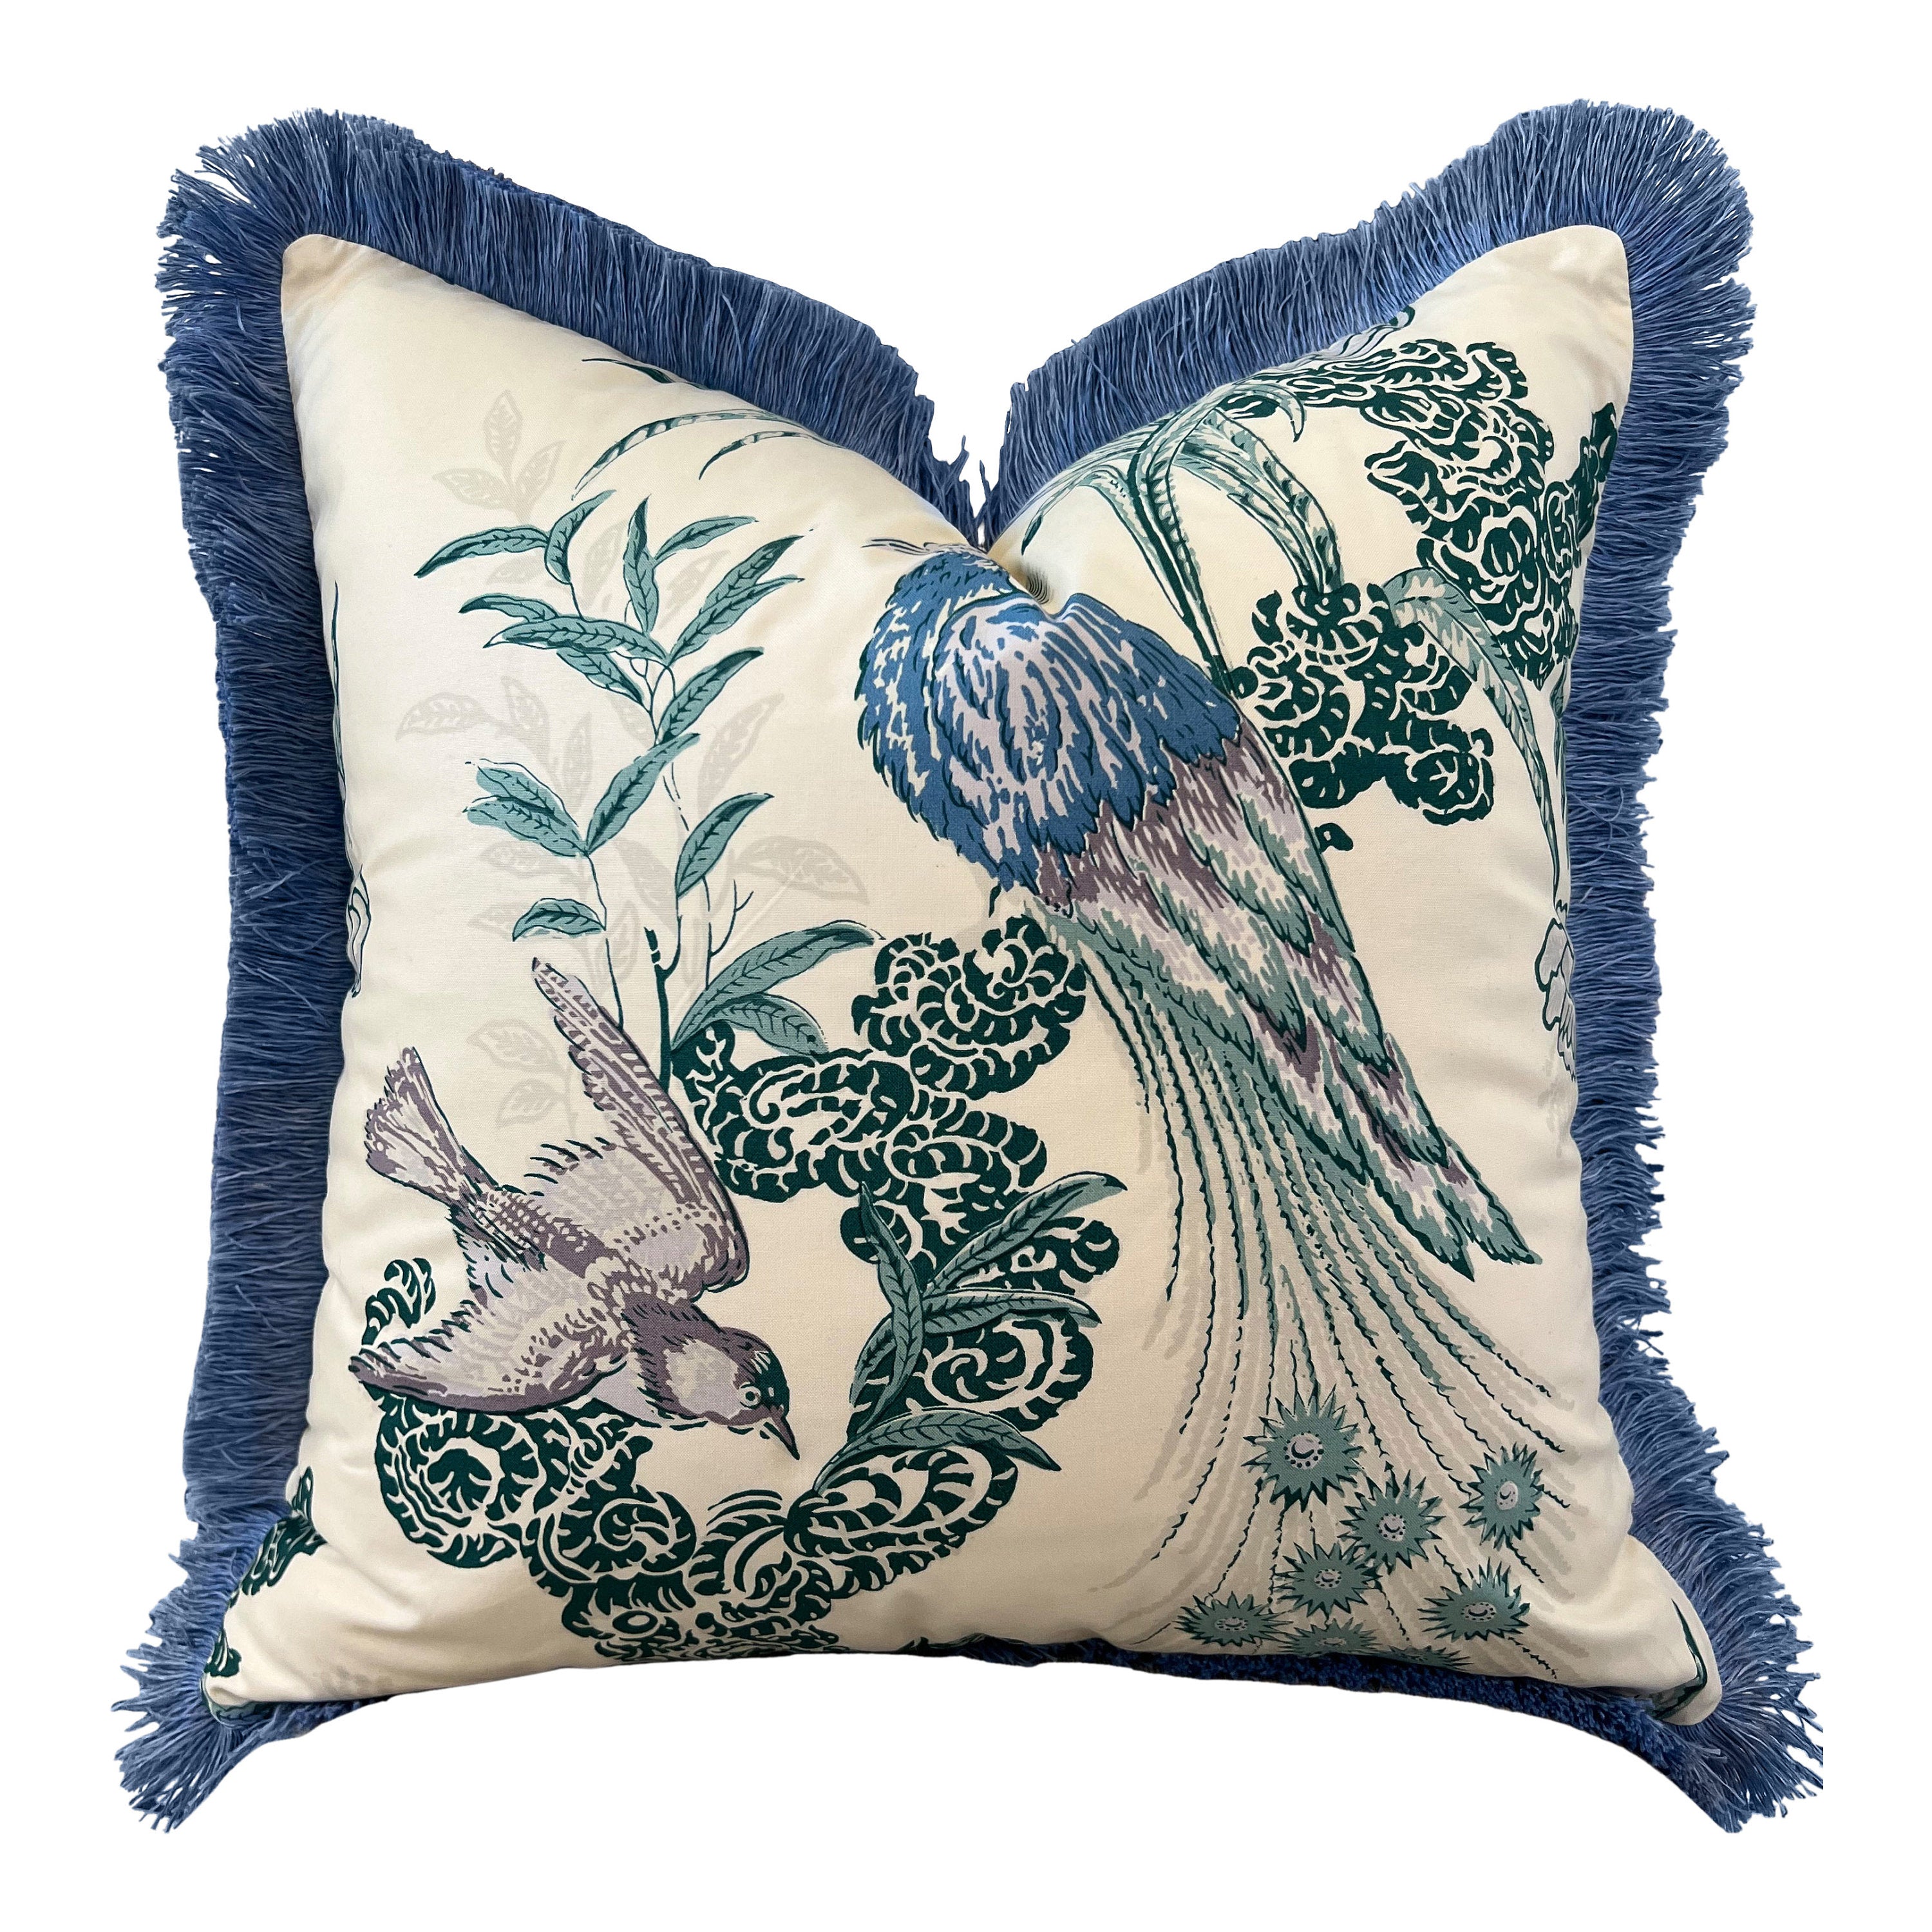 Schumacher Peacock Pillow in Cream and Teal Embellished with French Blue Brush Trim. Decorative High End  Pillows, Designer Pillow Covers,